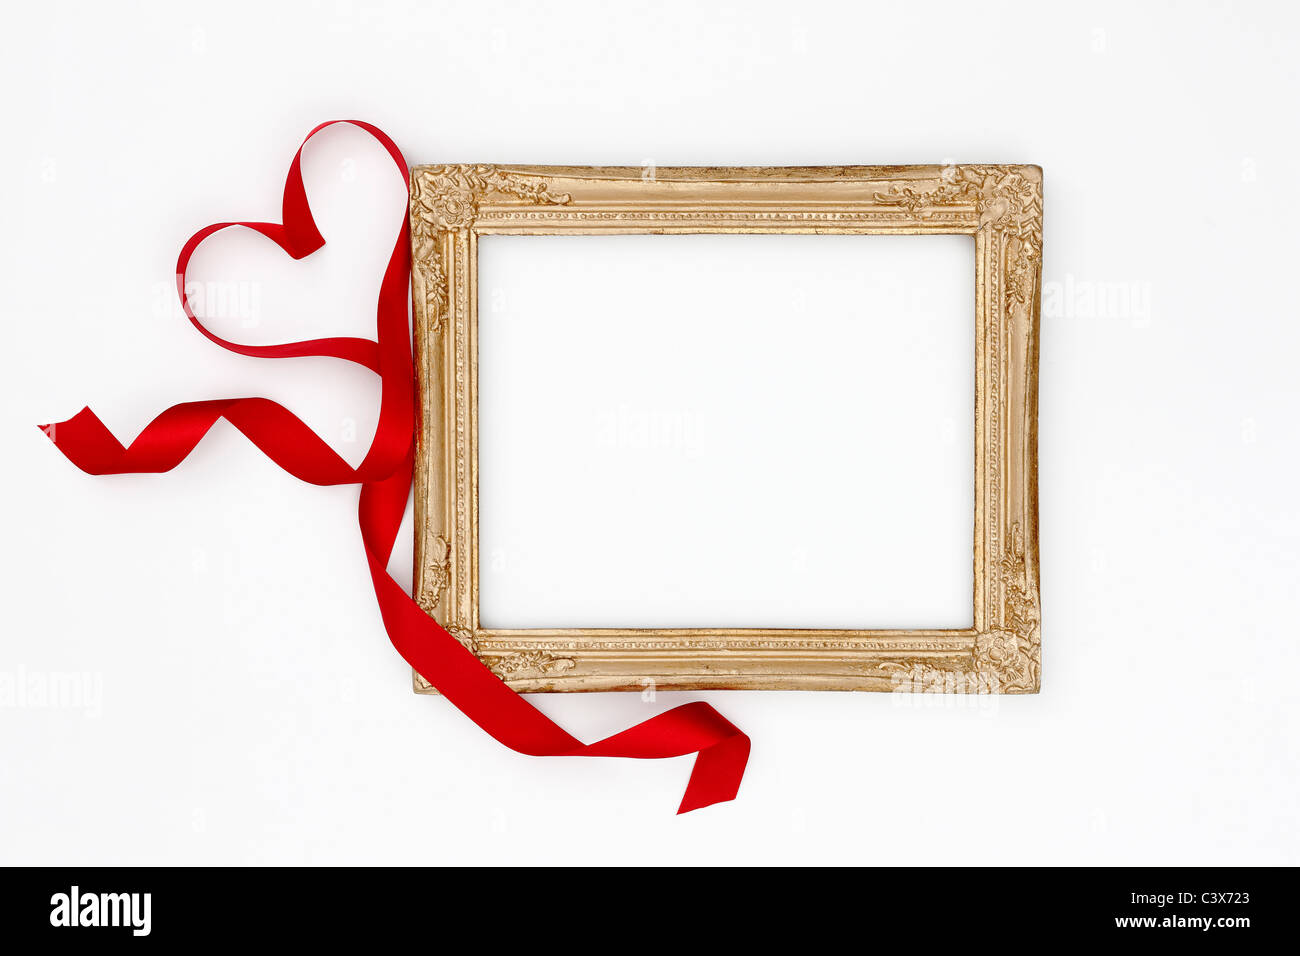 Gold picture frame and red ribbon Stock Photo